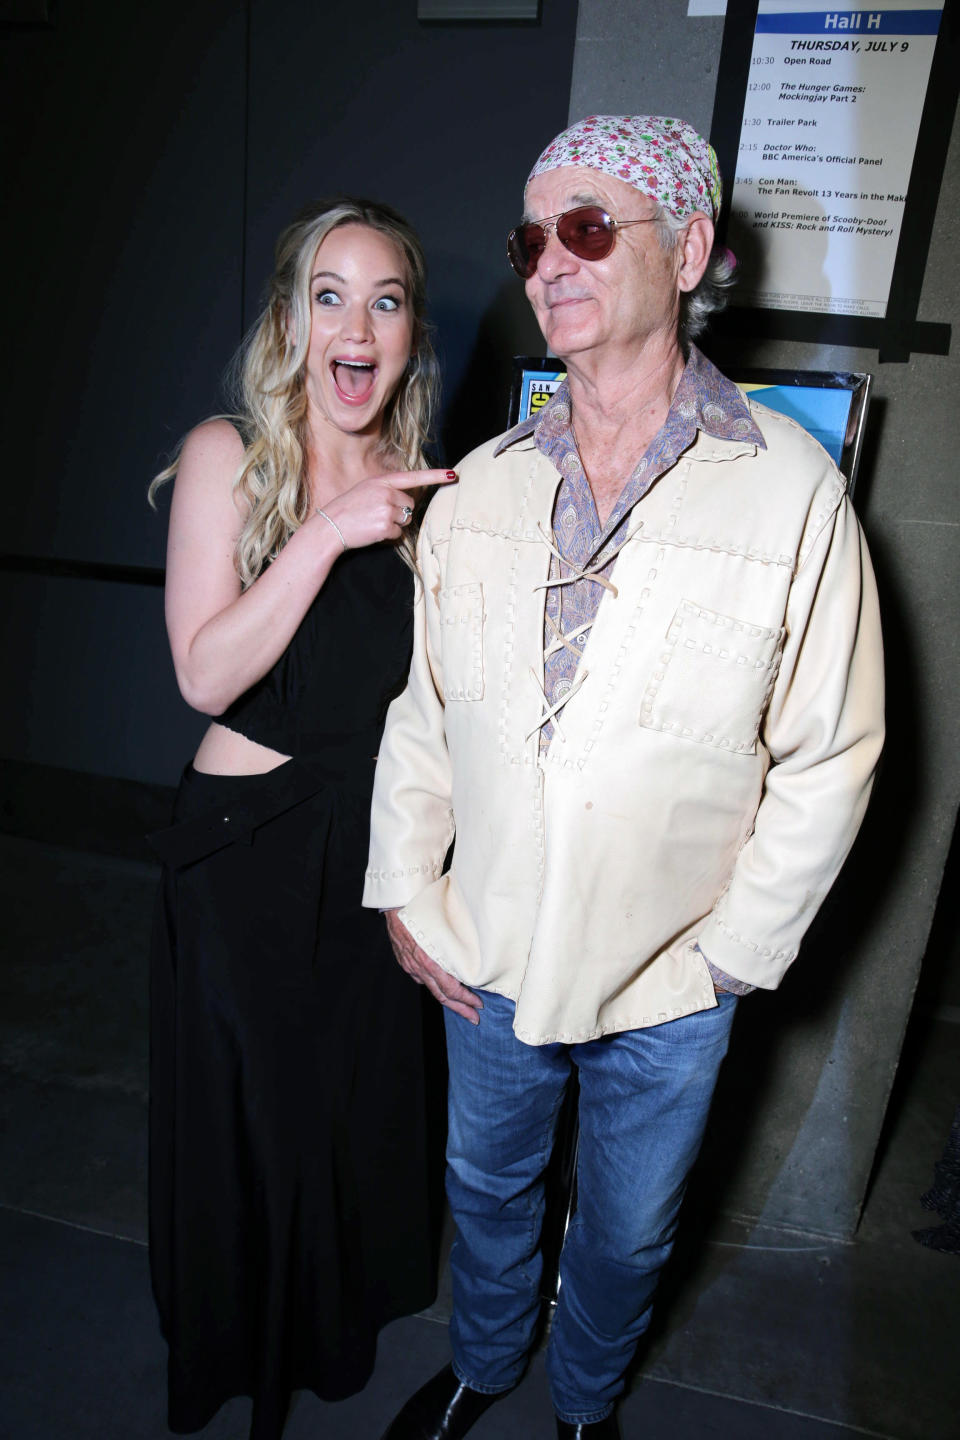 Jennifer Lawrence freaks out when meeting Bill Murray. (Photo: AP Images)